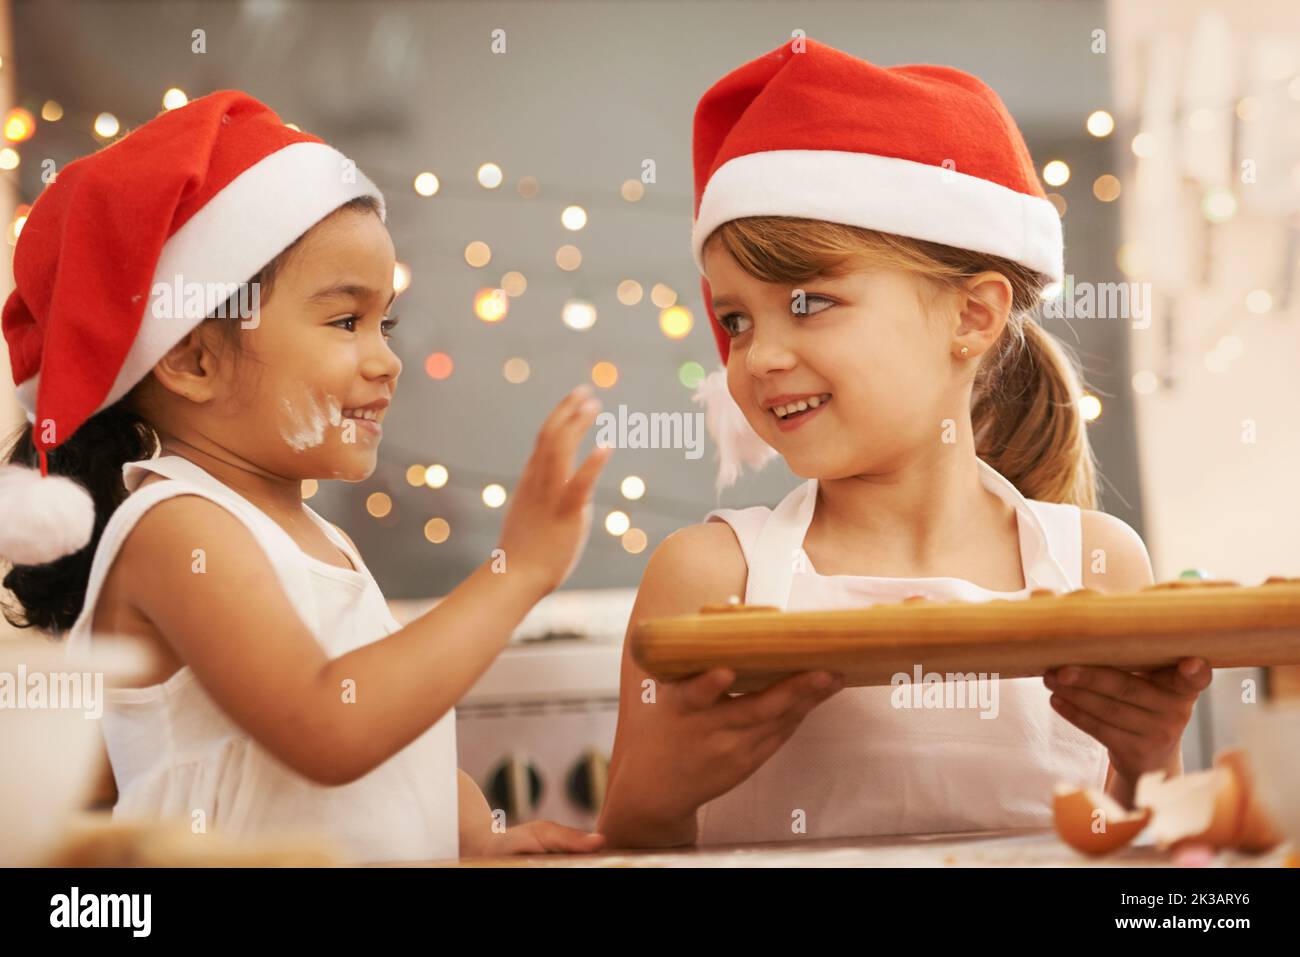 Playful bakers. Two little girls wearing santa hats baking in the kitchen. Stock Photo